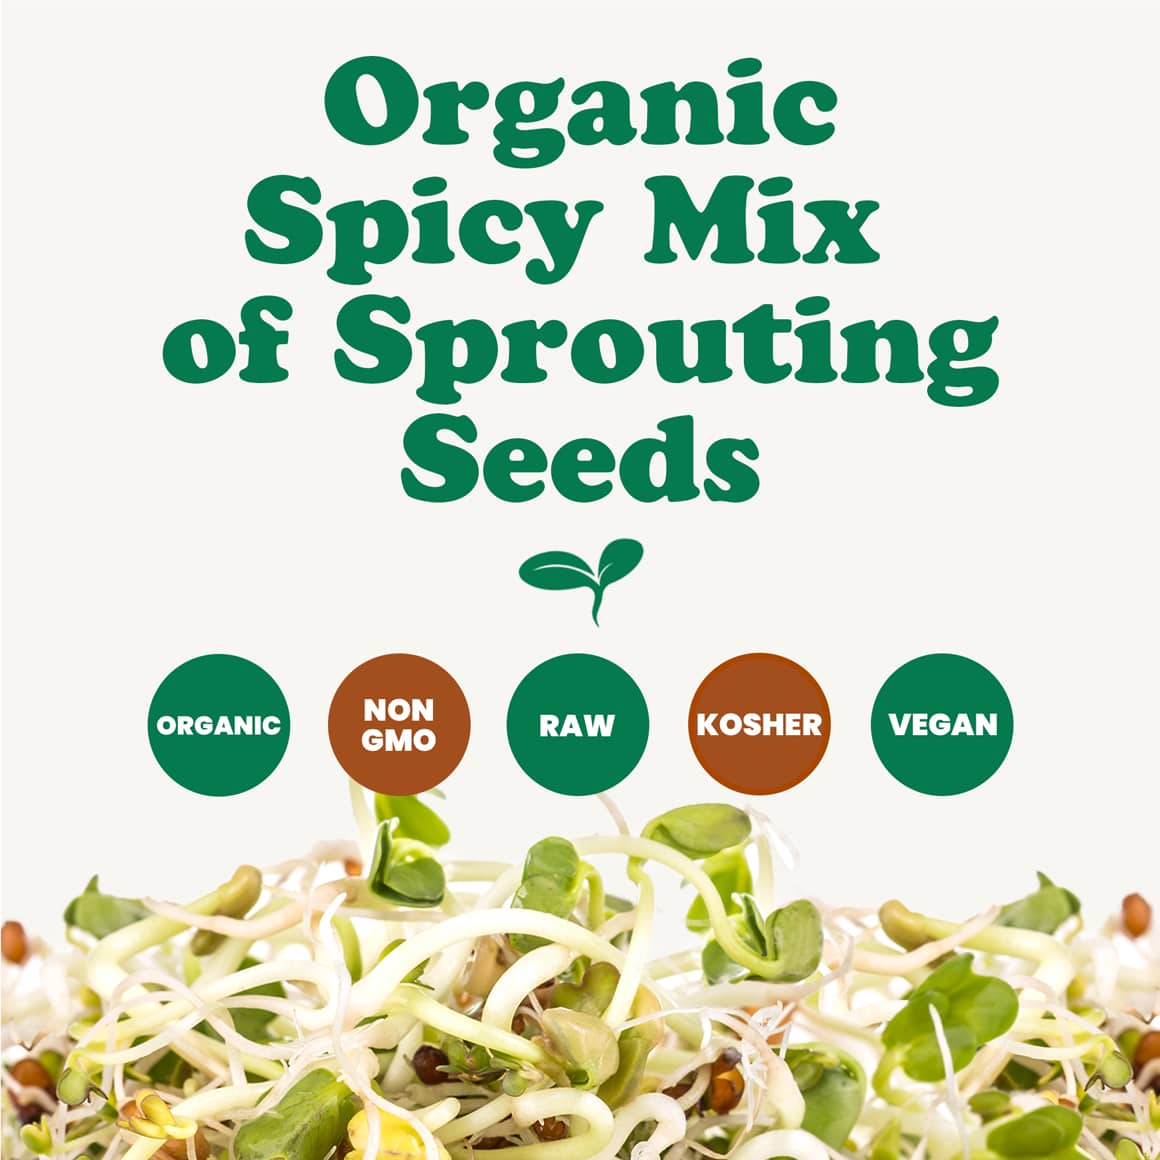 organic-spicy-mix-of-sprouting-seeds-2-min